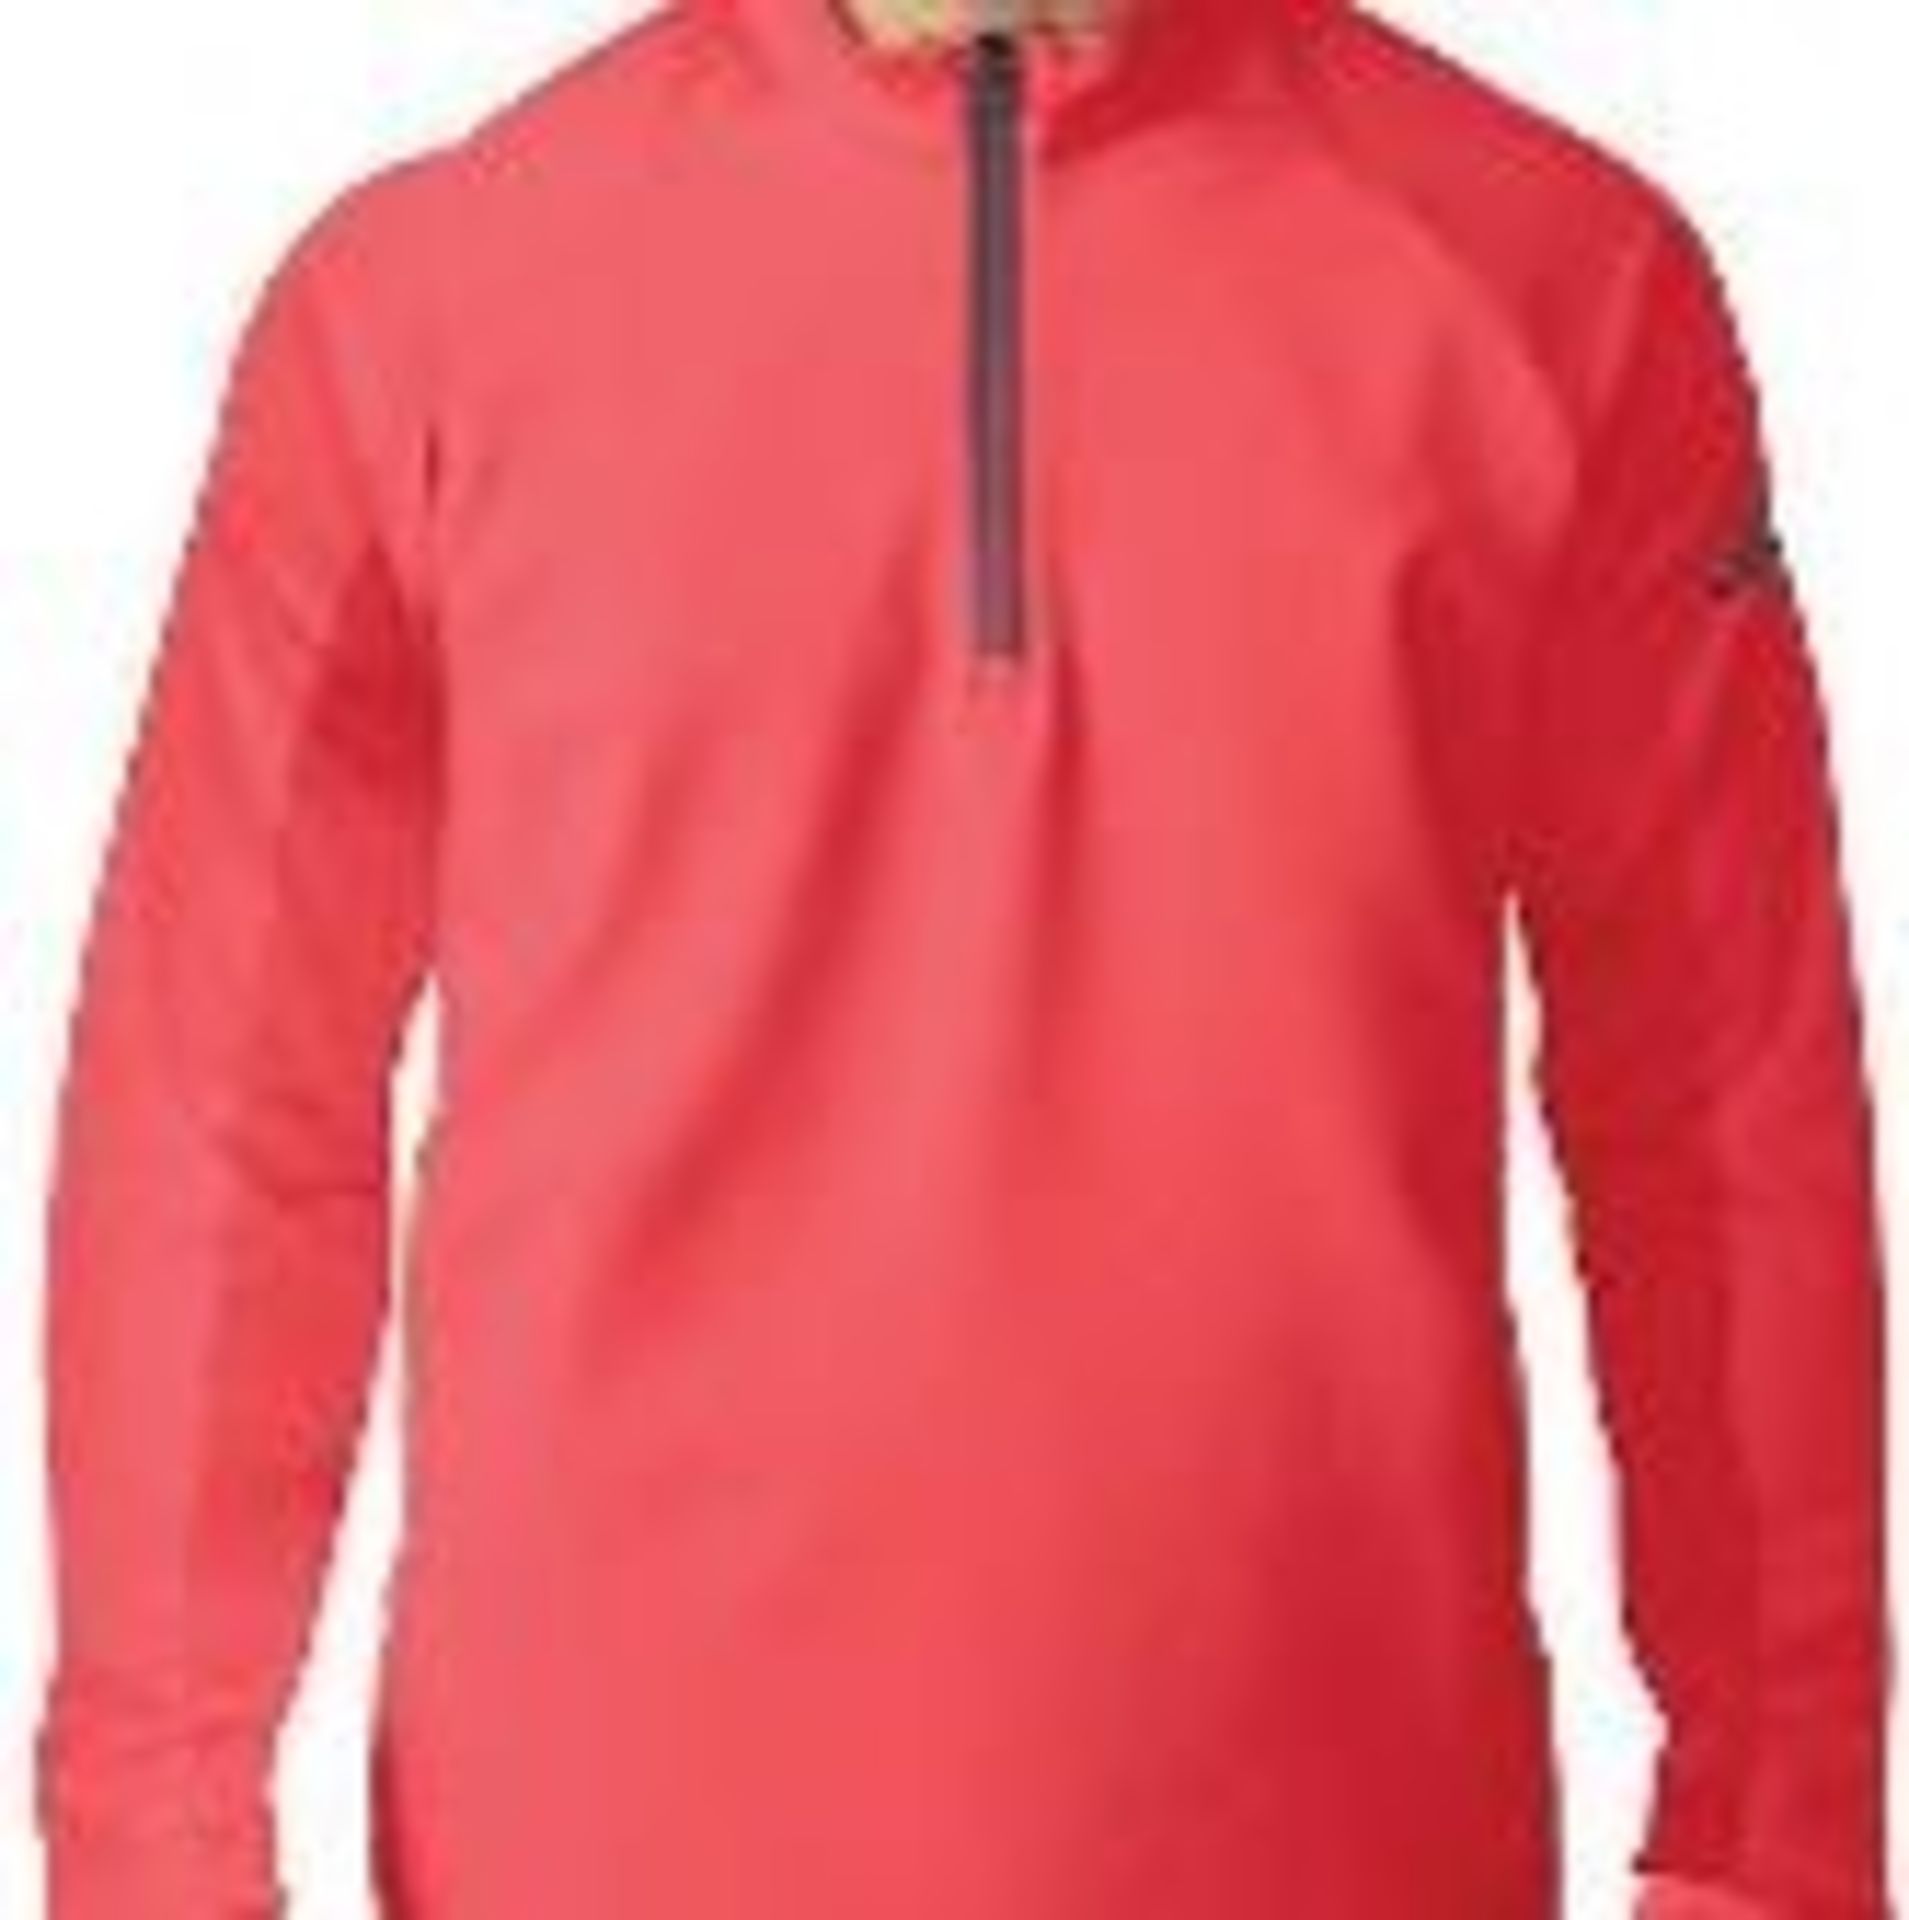 AE8798 -Adidas Men's Climacool 1/4 Zip Layering - Shock Red/Min Blue - MSRP $100